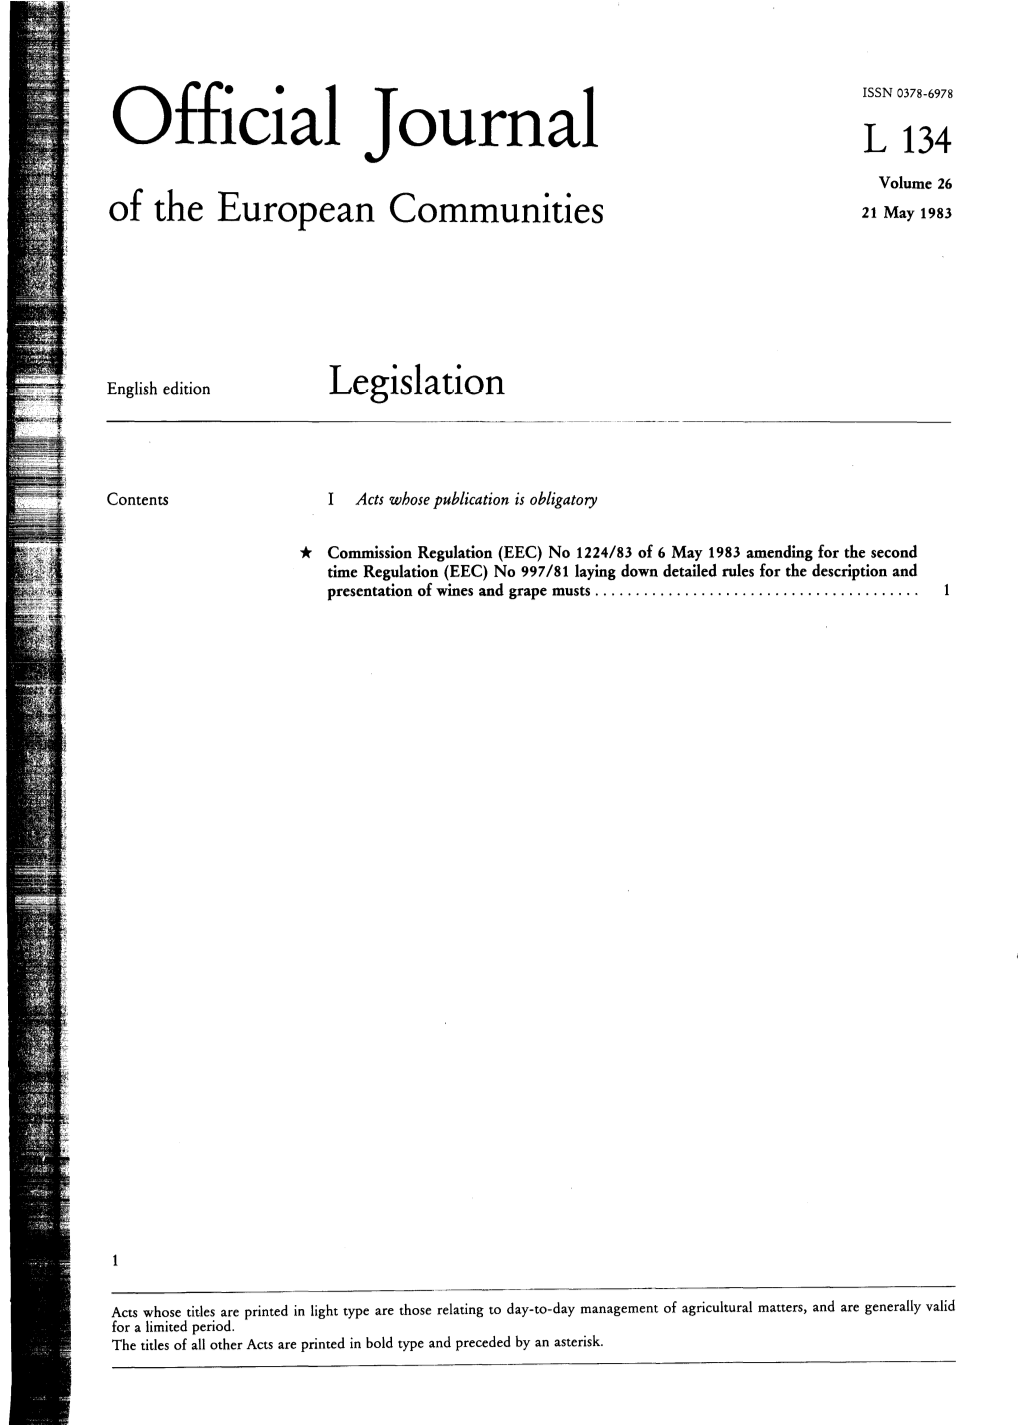 Of the European Communities 21 May 1983